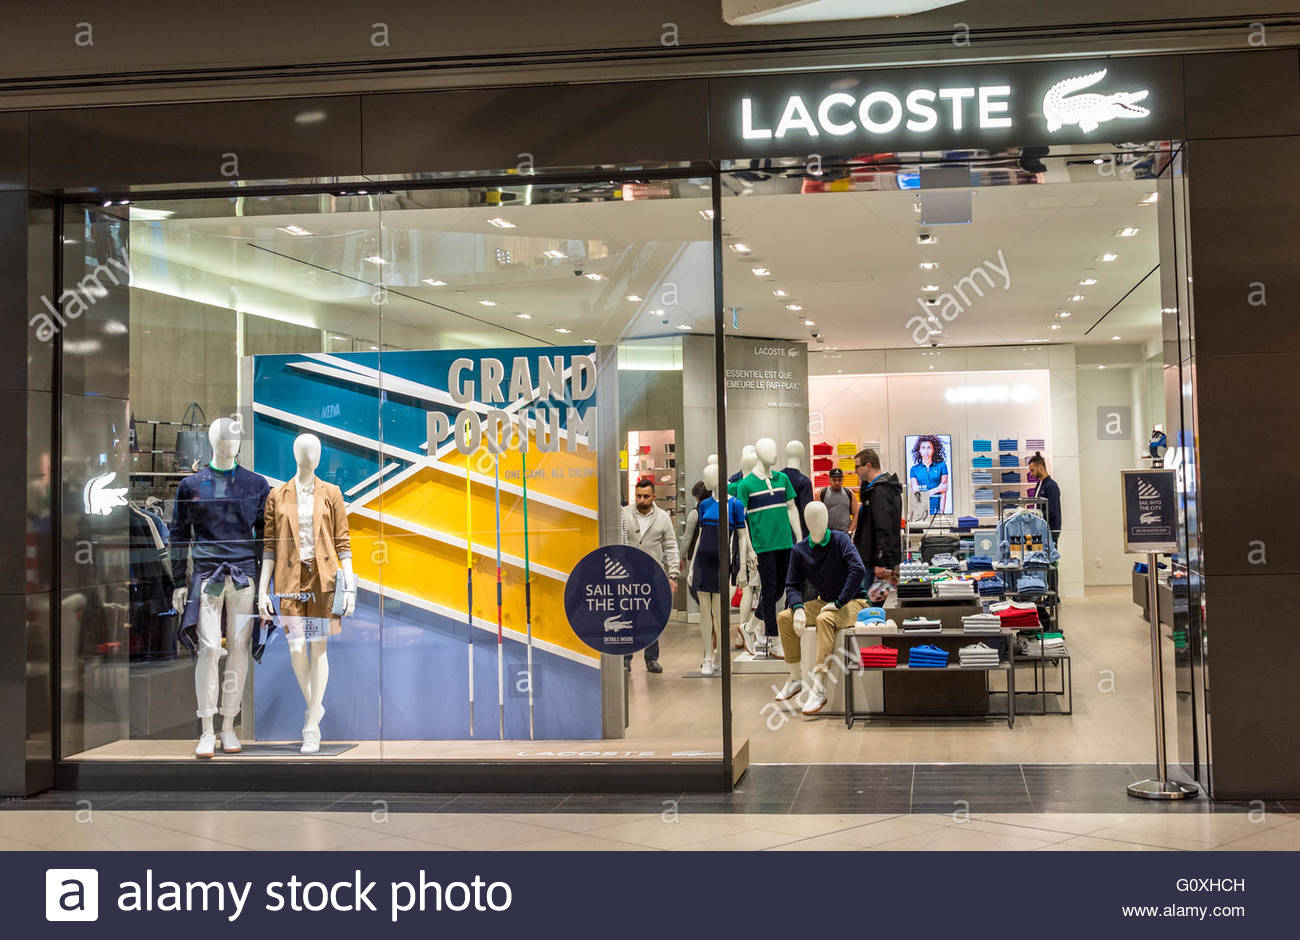 lacoste clothing store